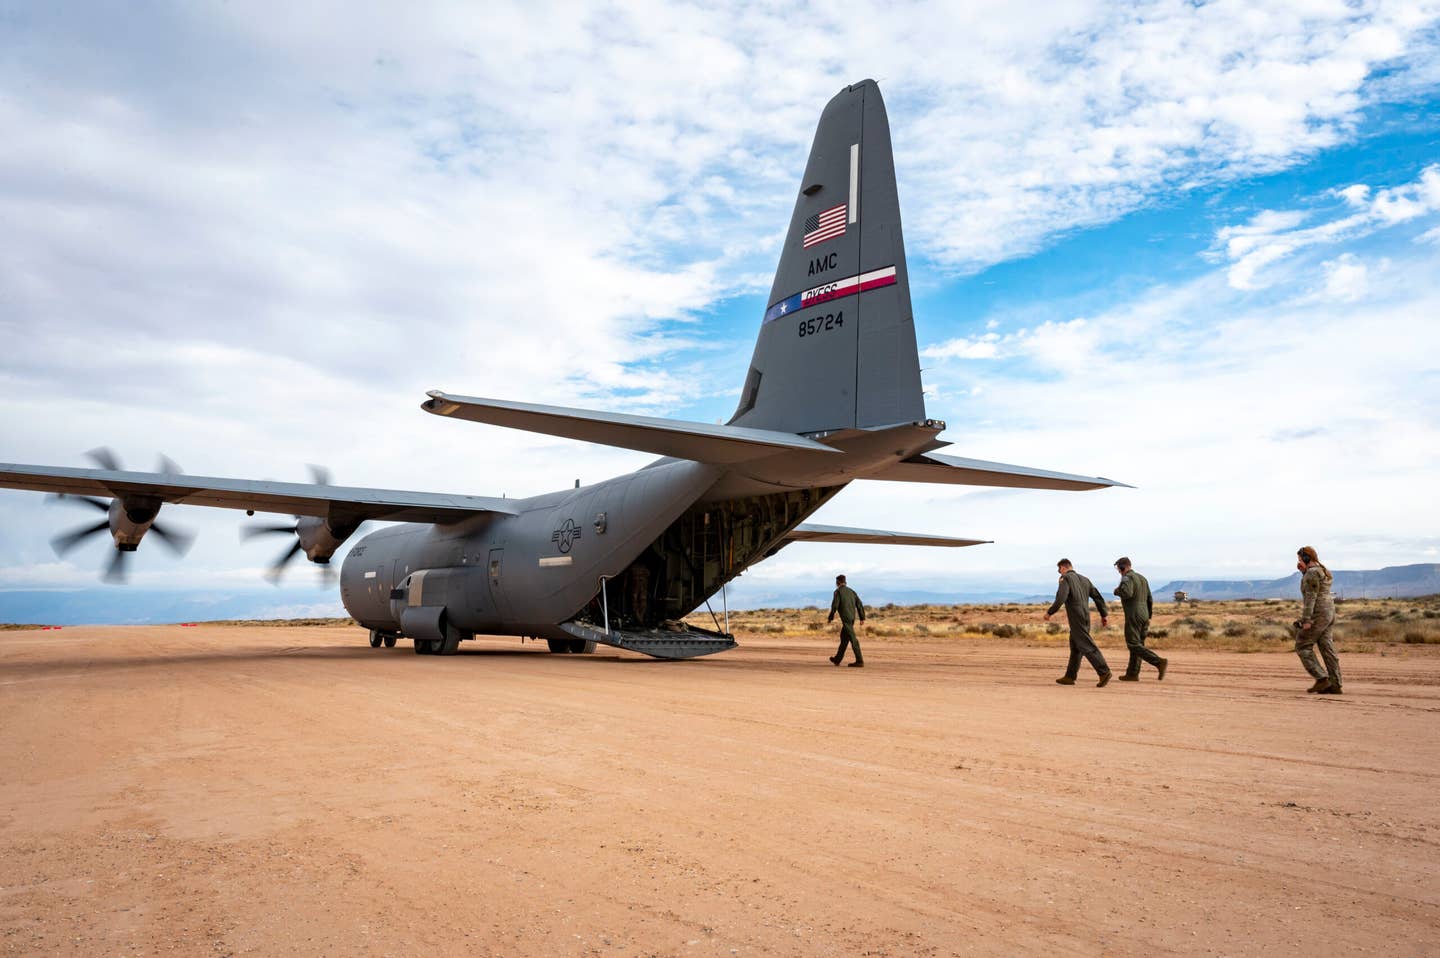 U.S. Airmen from the 40th Airlift Squadron board a C-130J Super Hercules for take-off after simulating refueling from an M1A2 Abrams tank at Fort Bliss. <em>Credit: U.S. Air Force photo by Senior Airman Leon Redfern</em>